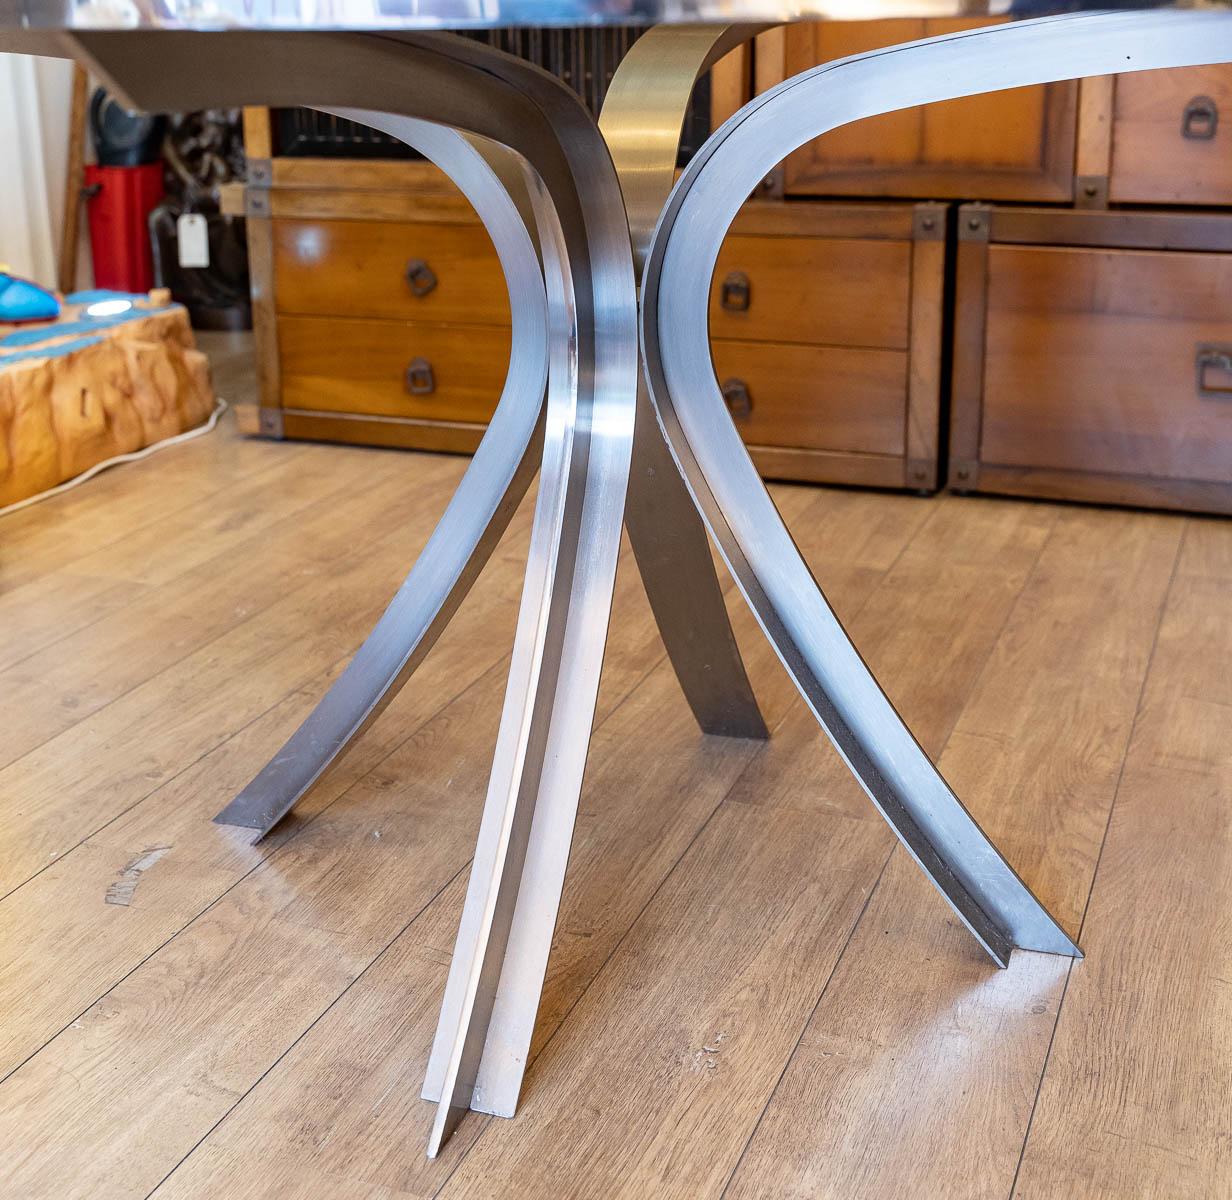 Xavier Feal table (Jean-Claude Neyton)
Smoked glass top, stainless steel base, 1960-1970
H: 74 cm, W: 131 cm, D: 64 cm
ref 3289